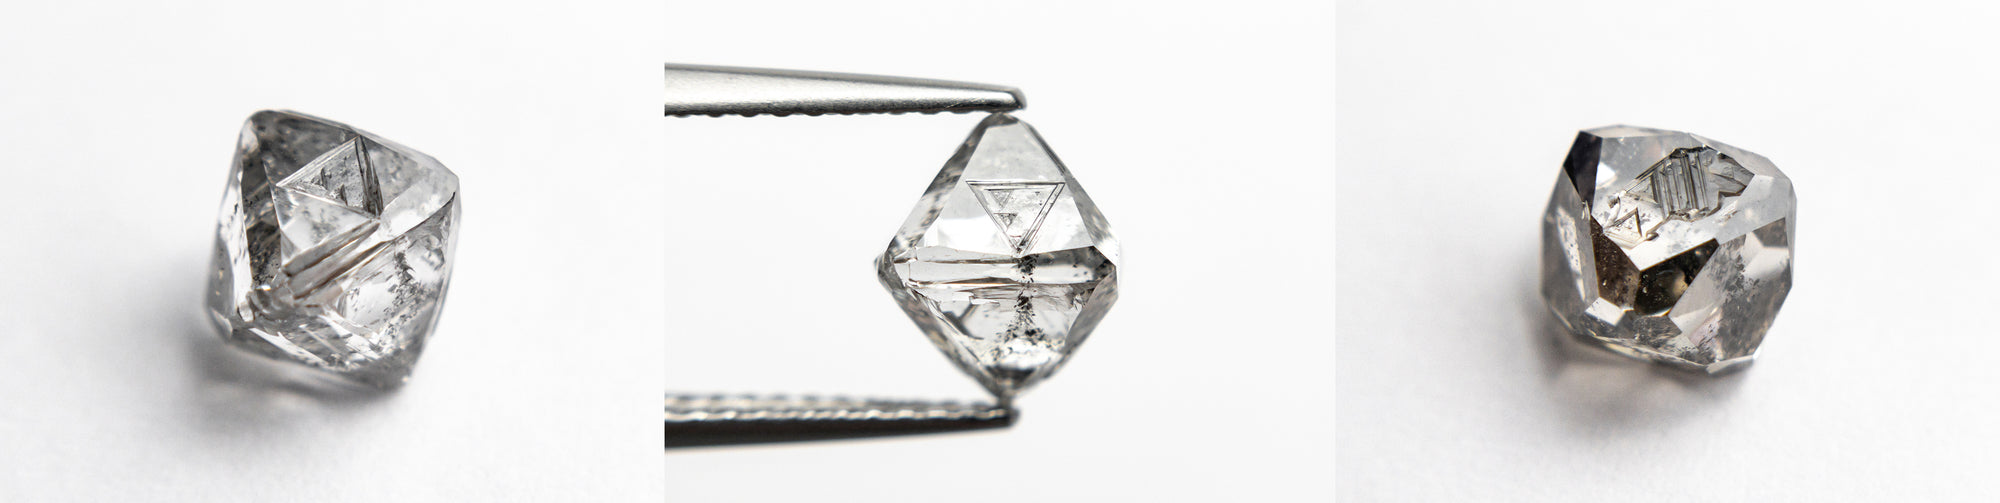 What's Going on with the Diamond Supply Chain?